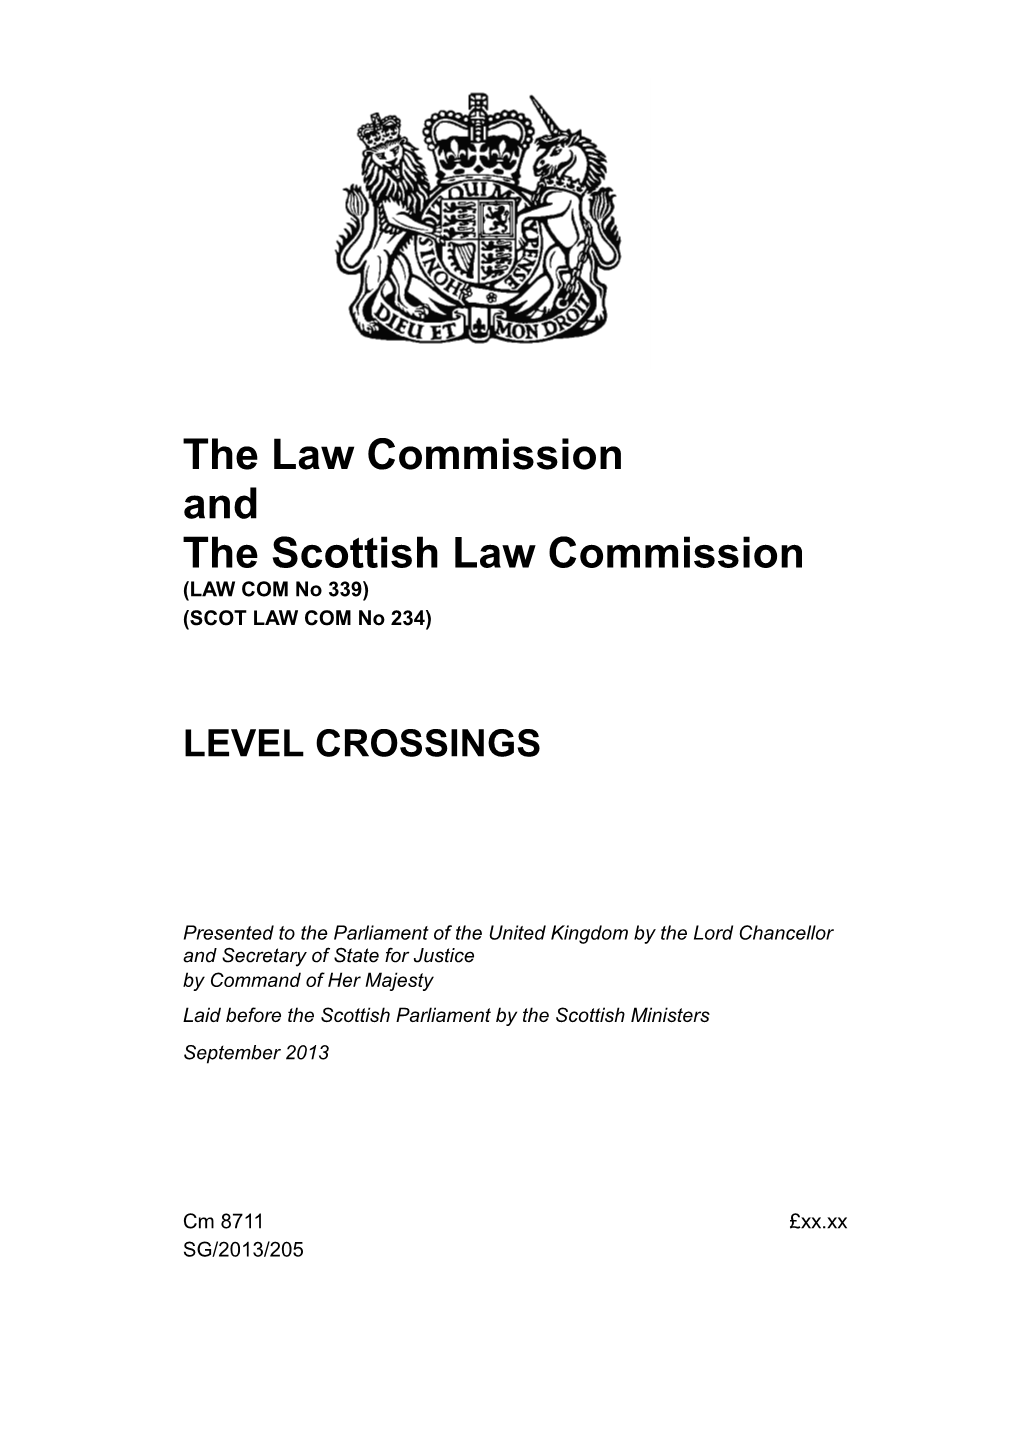 Law Commission Lc339 Level Crossings